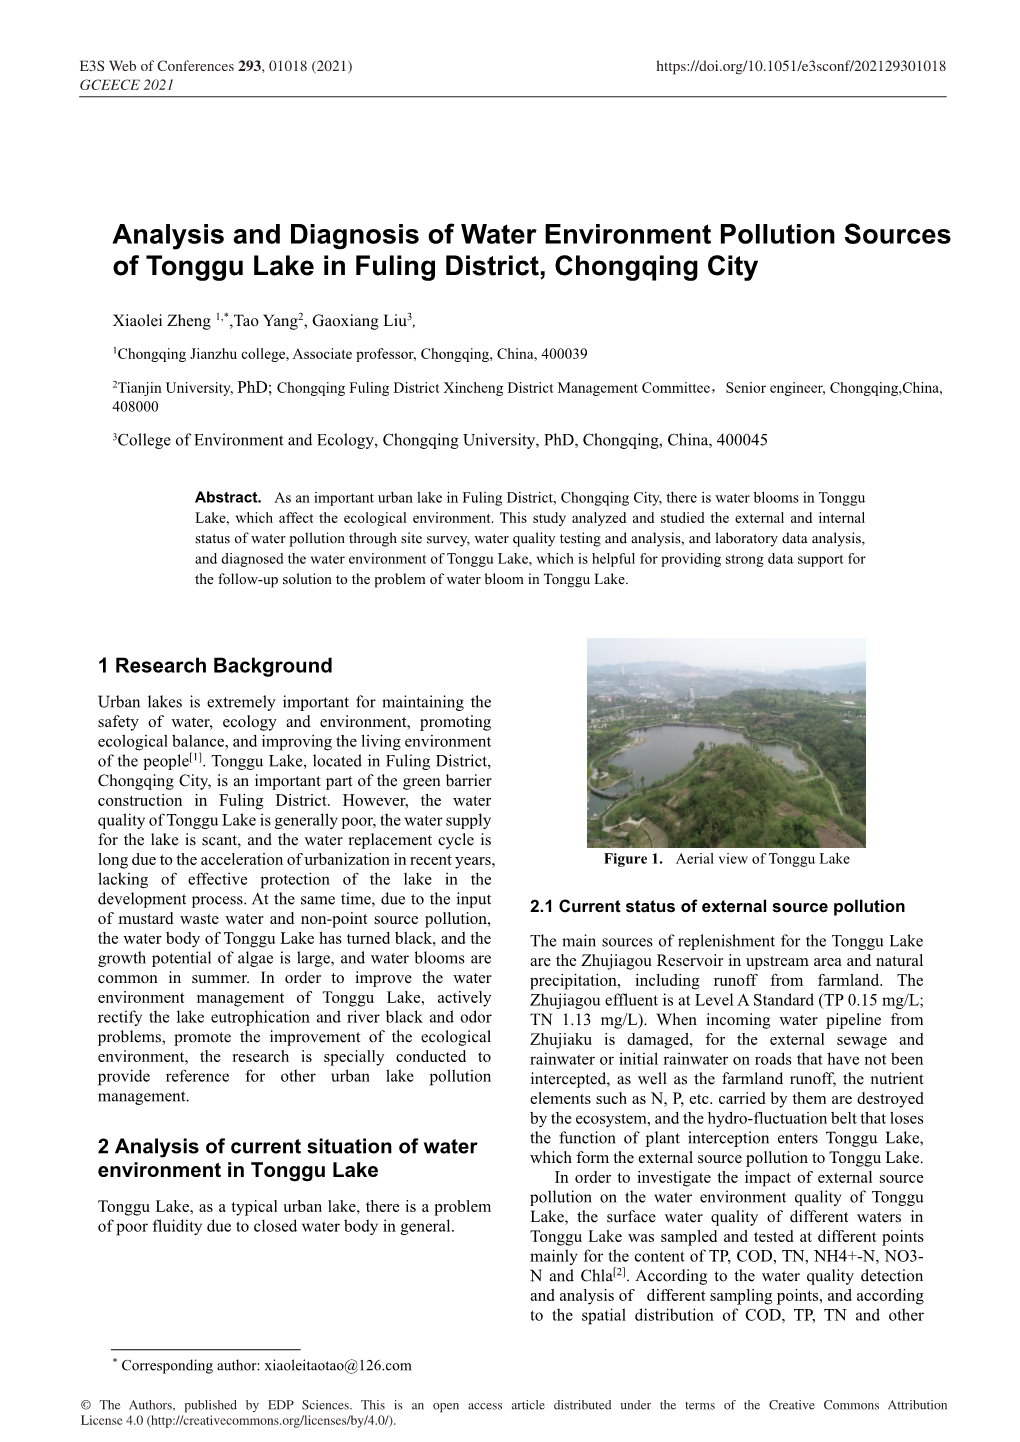 Analysis and Diagnosis of Water Environment Pollution Sources of Tonggu Lake in Fuling District, Chongqing City